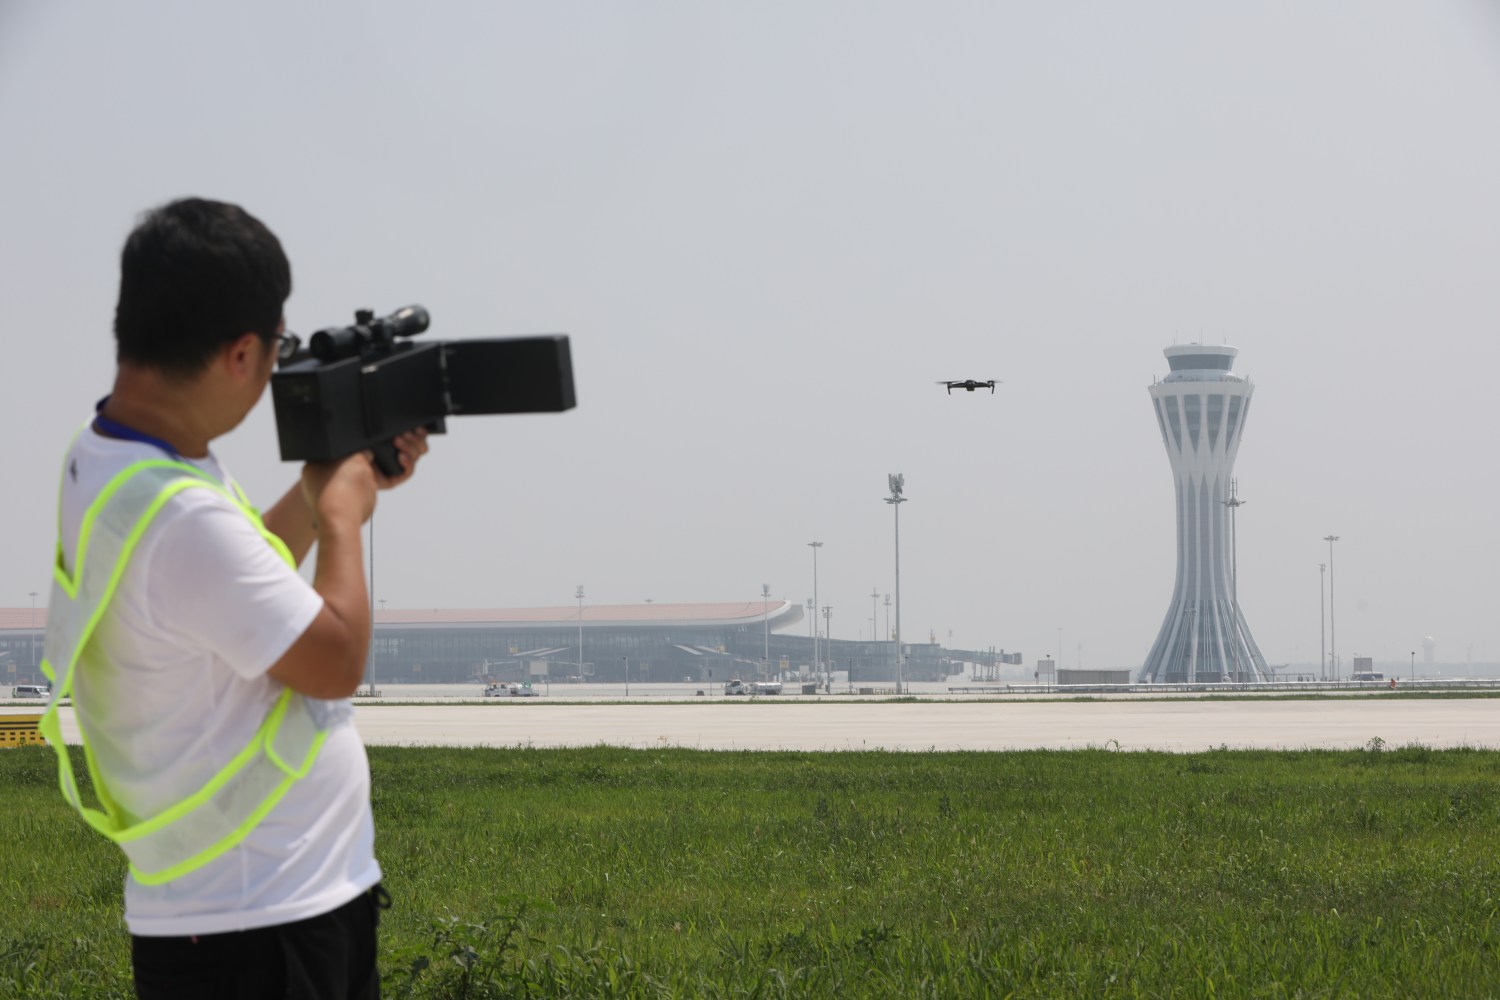 A man in a high-visibility vest tests an anti-drone system at Beijing's international airport.